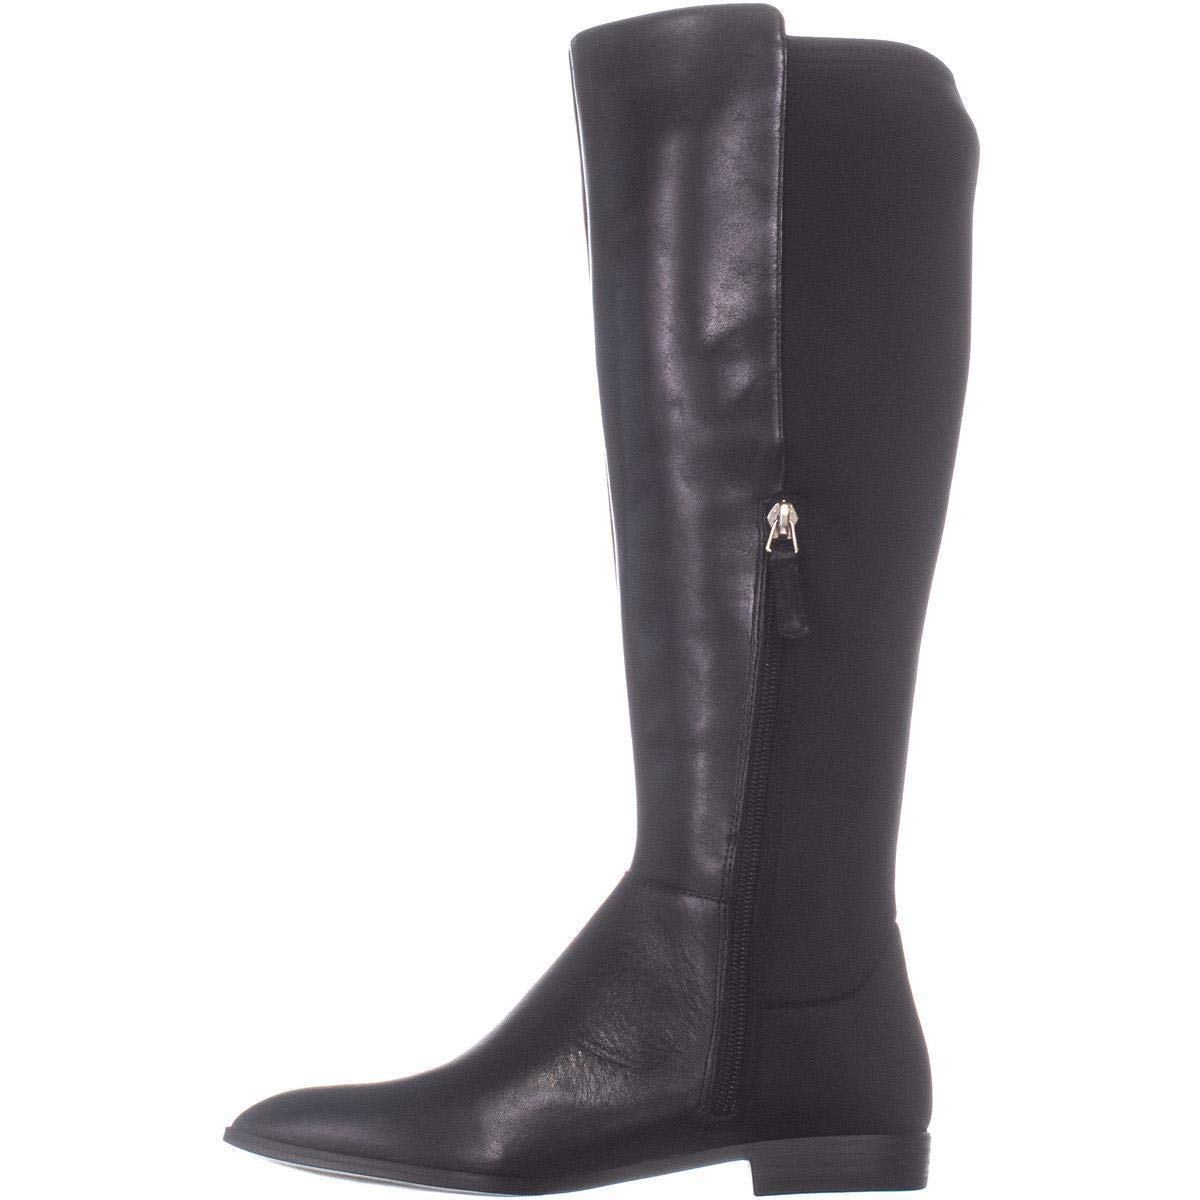 Nine West Womens Owenford Pointed Toe Knee High Riding Boots Black Size 75 5w Ebay 6353